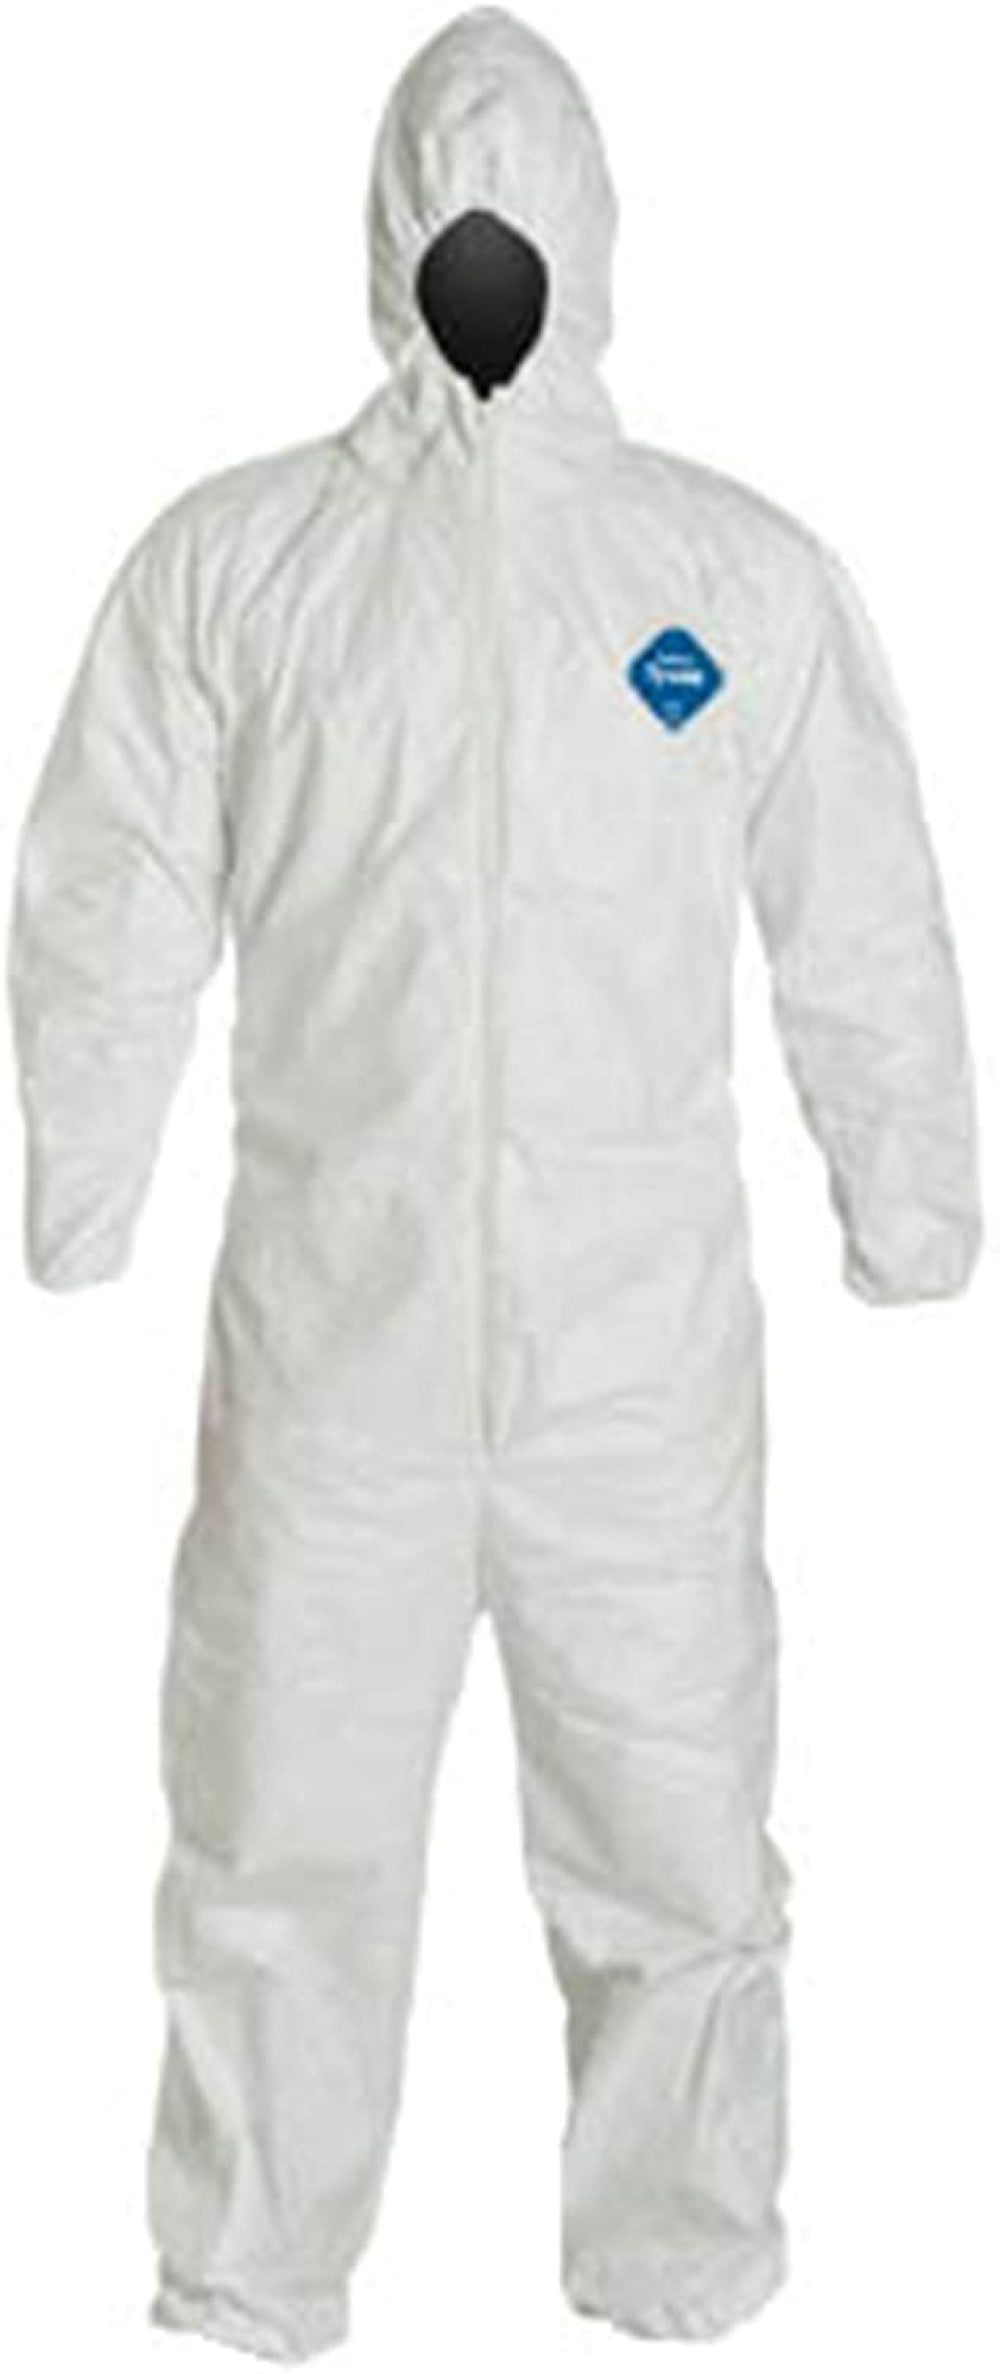 25 XL-25 Suits / 1 Case XL TY127S WH Zipper Elastic Wrist & Ankle XL Tyvek Coverall W/ Hood 